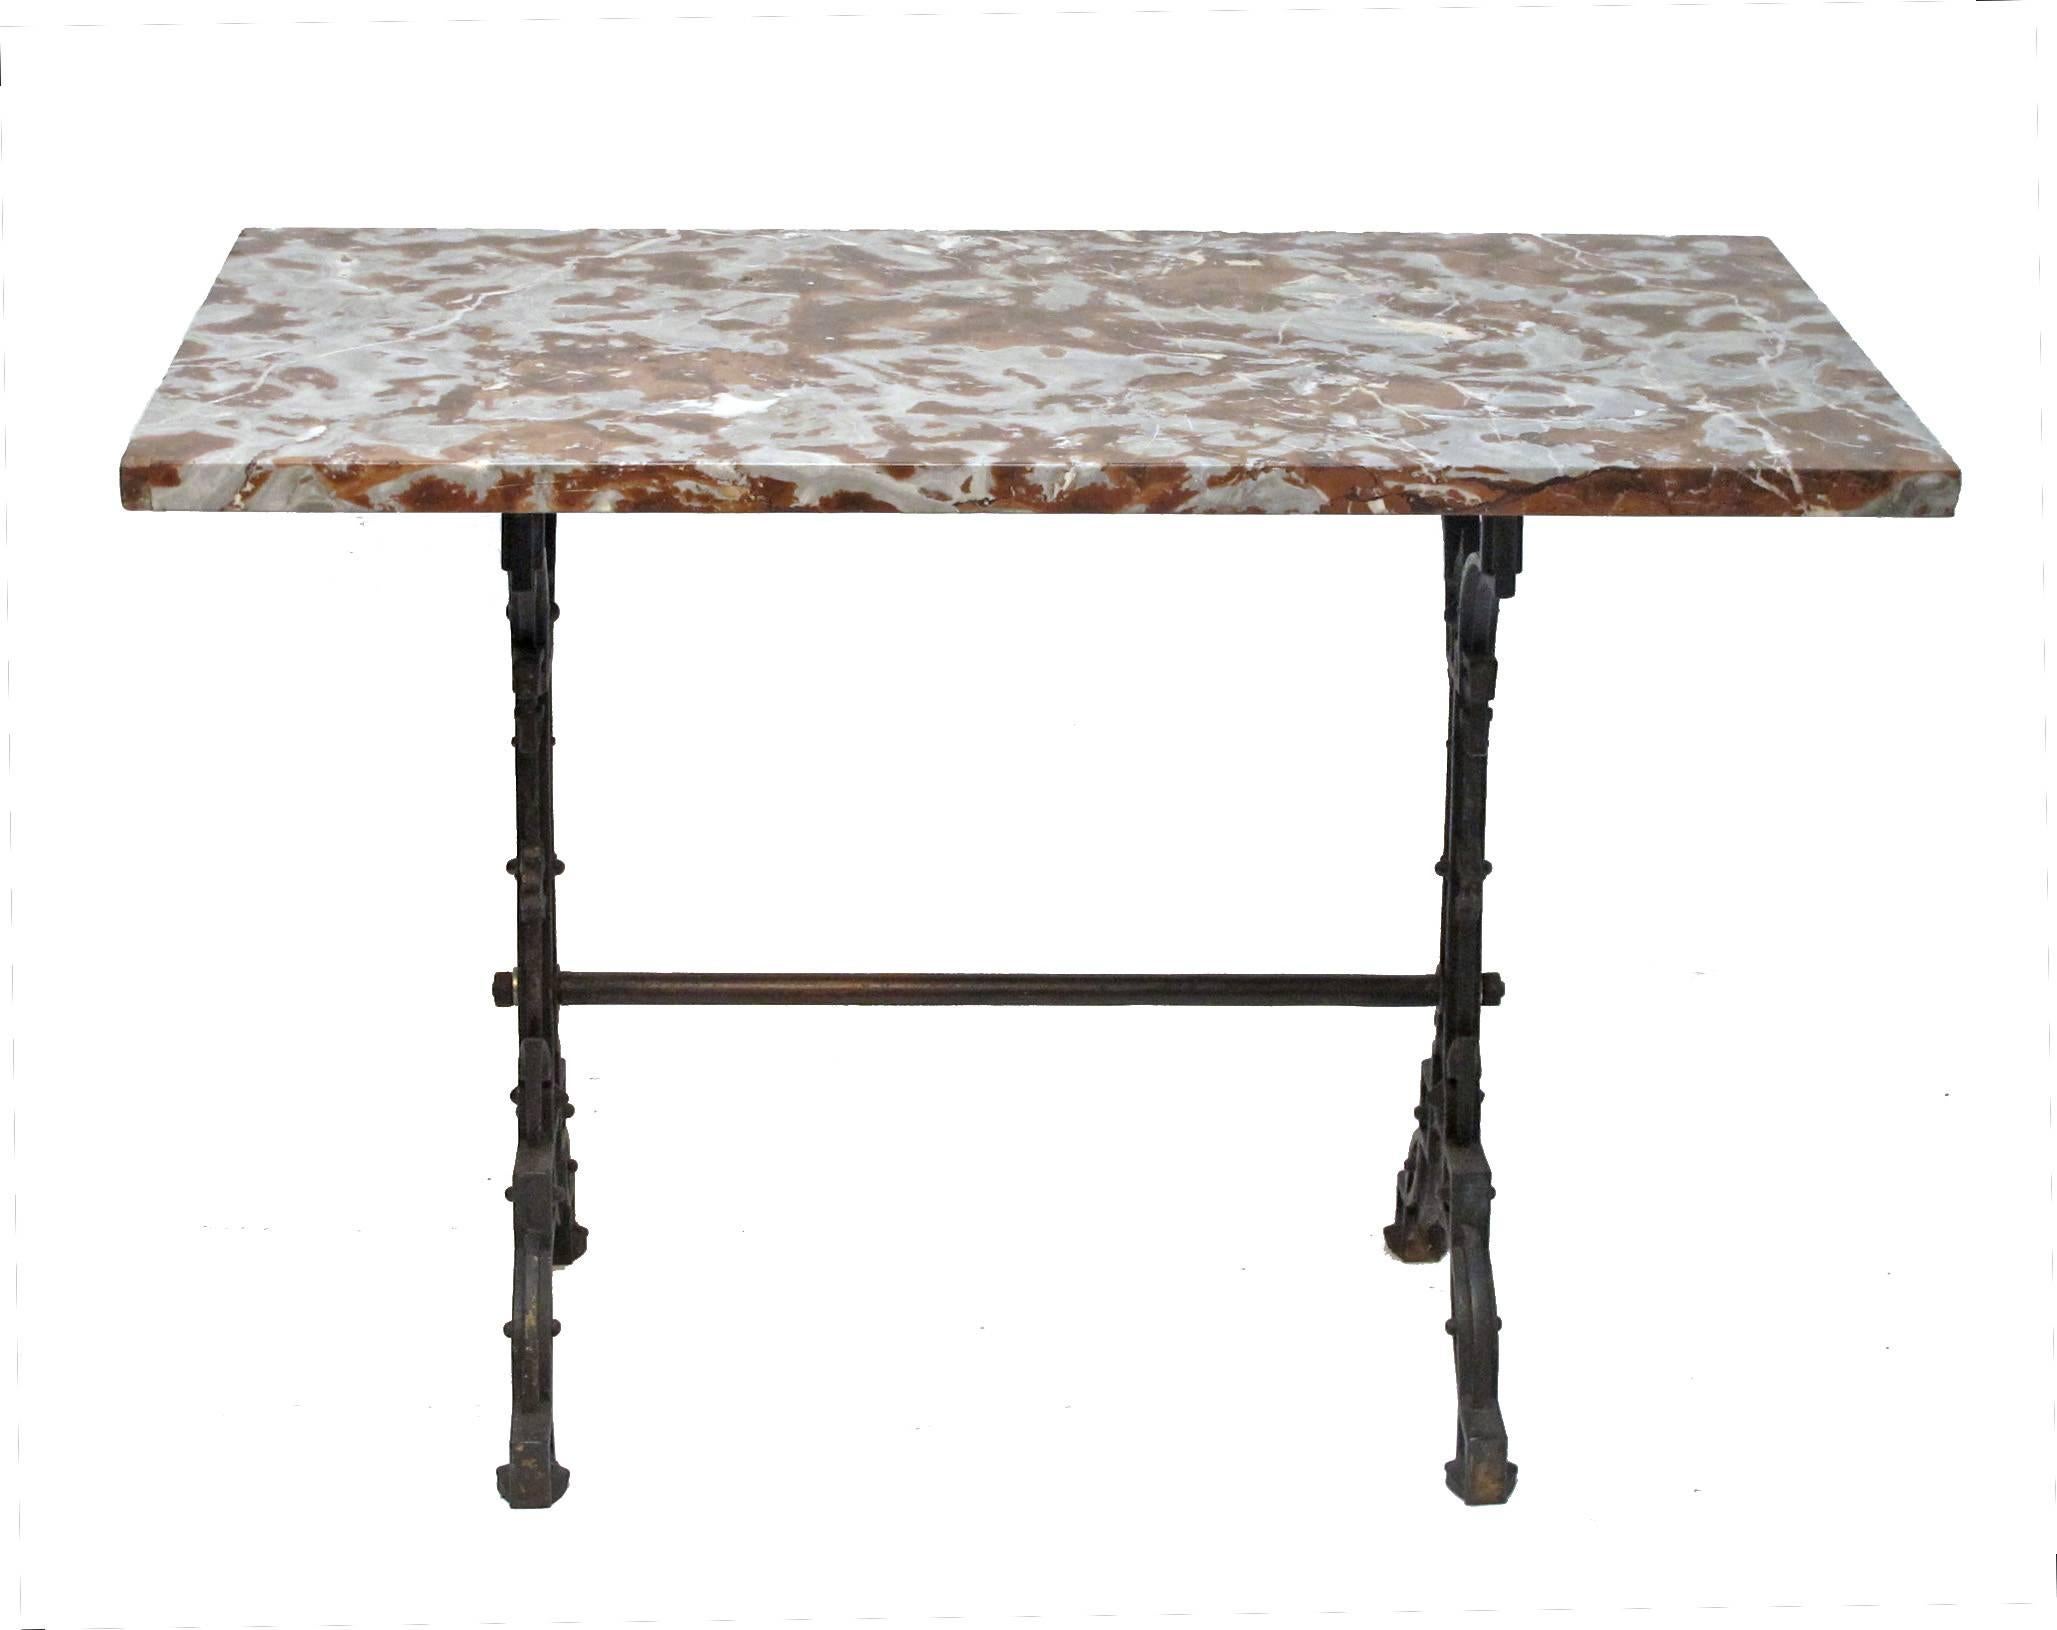 Cafe table with beautifully aged cast iron base and extraordinary fossilized rouge color marble top. France, late 19th century.